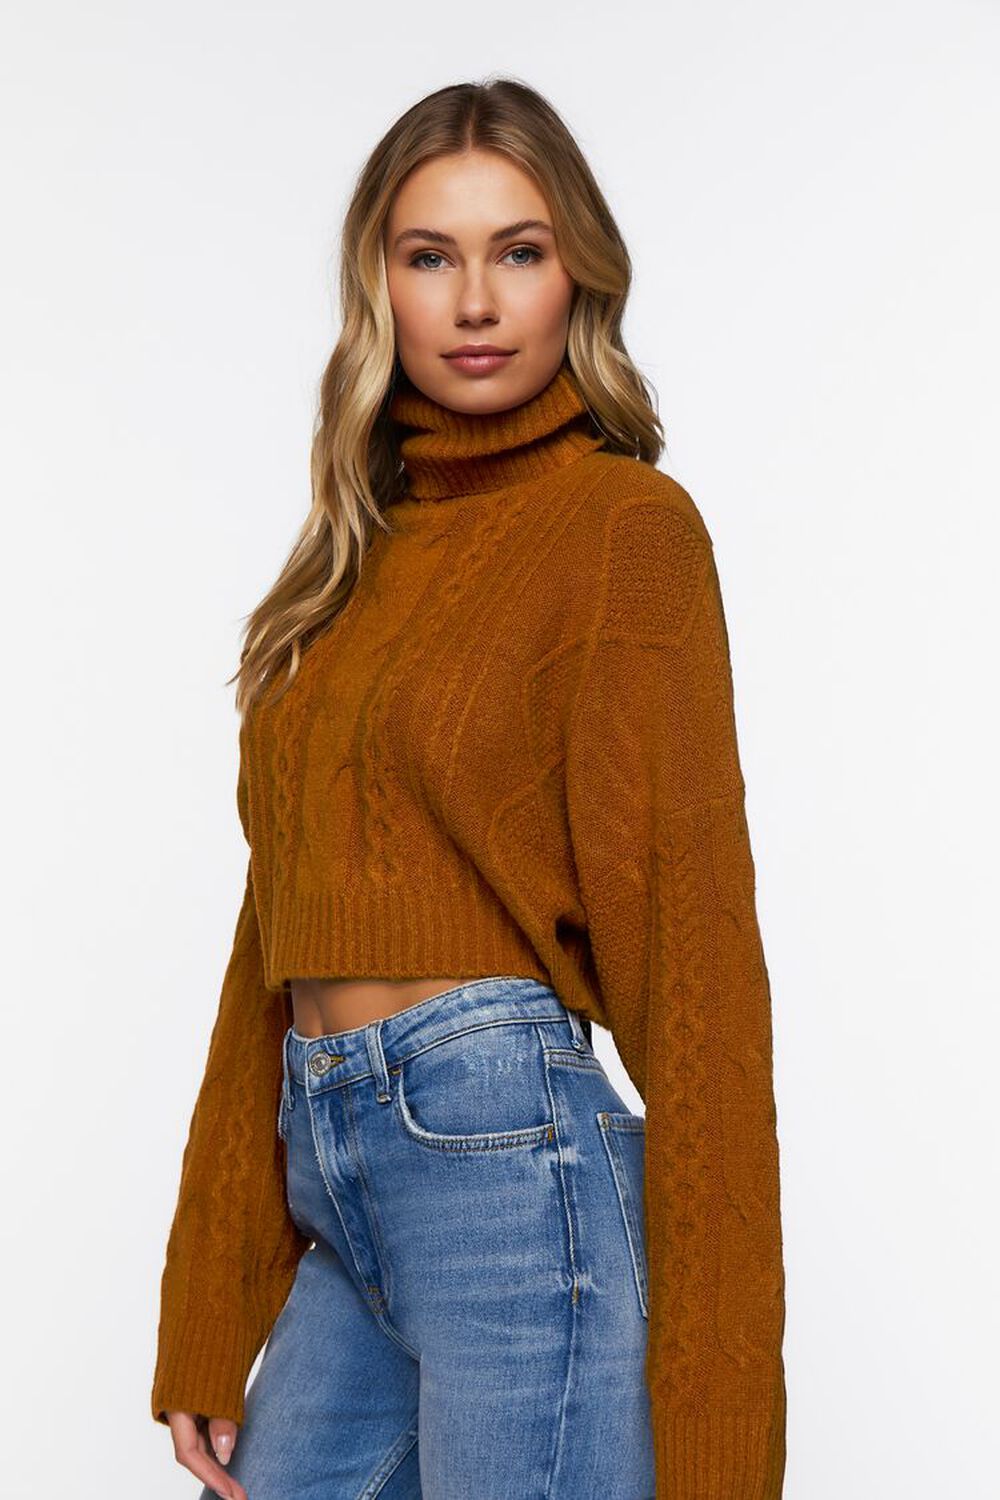 BROWN Cropped Cable Knit Turtleneck Sweater, image 2